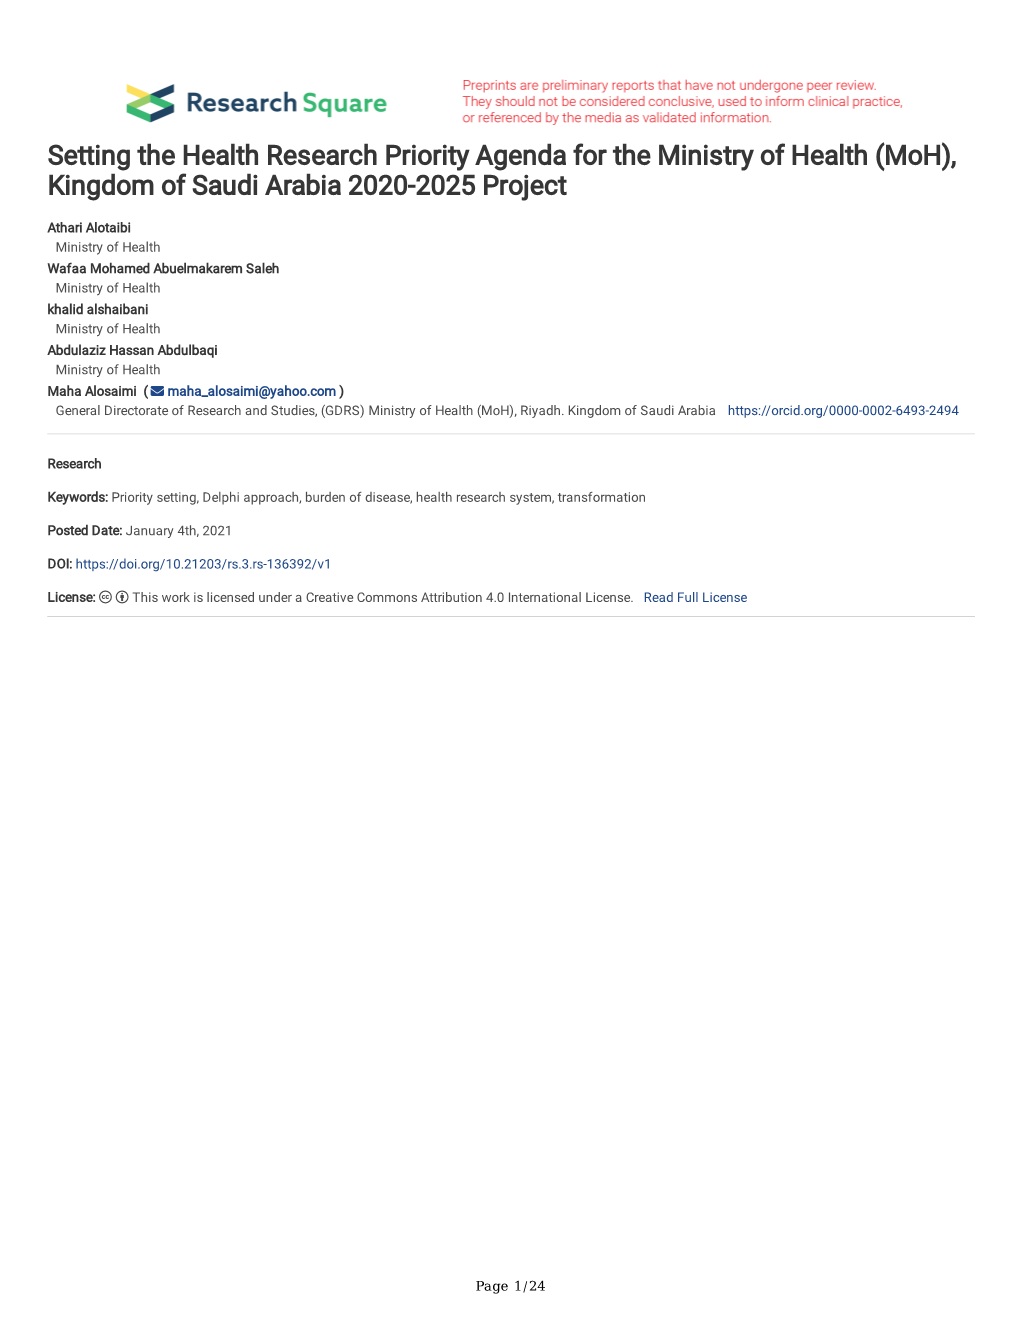 Setting the Health Research Priority Agenda for the Ministry of Health (Moh), Kingdom of Saudi Arabia 2020-2025 Project